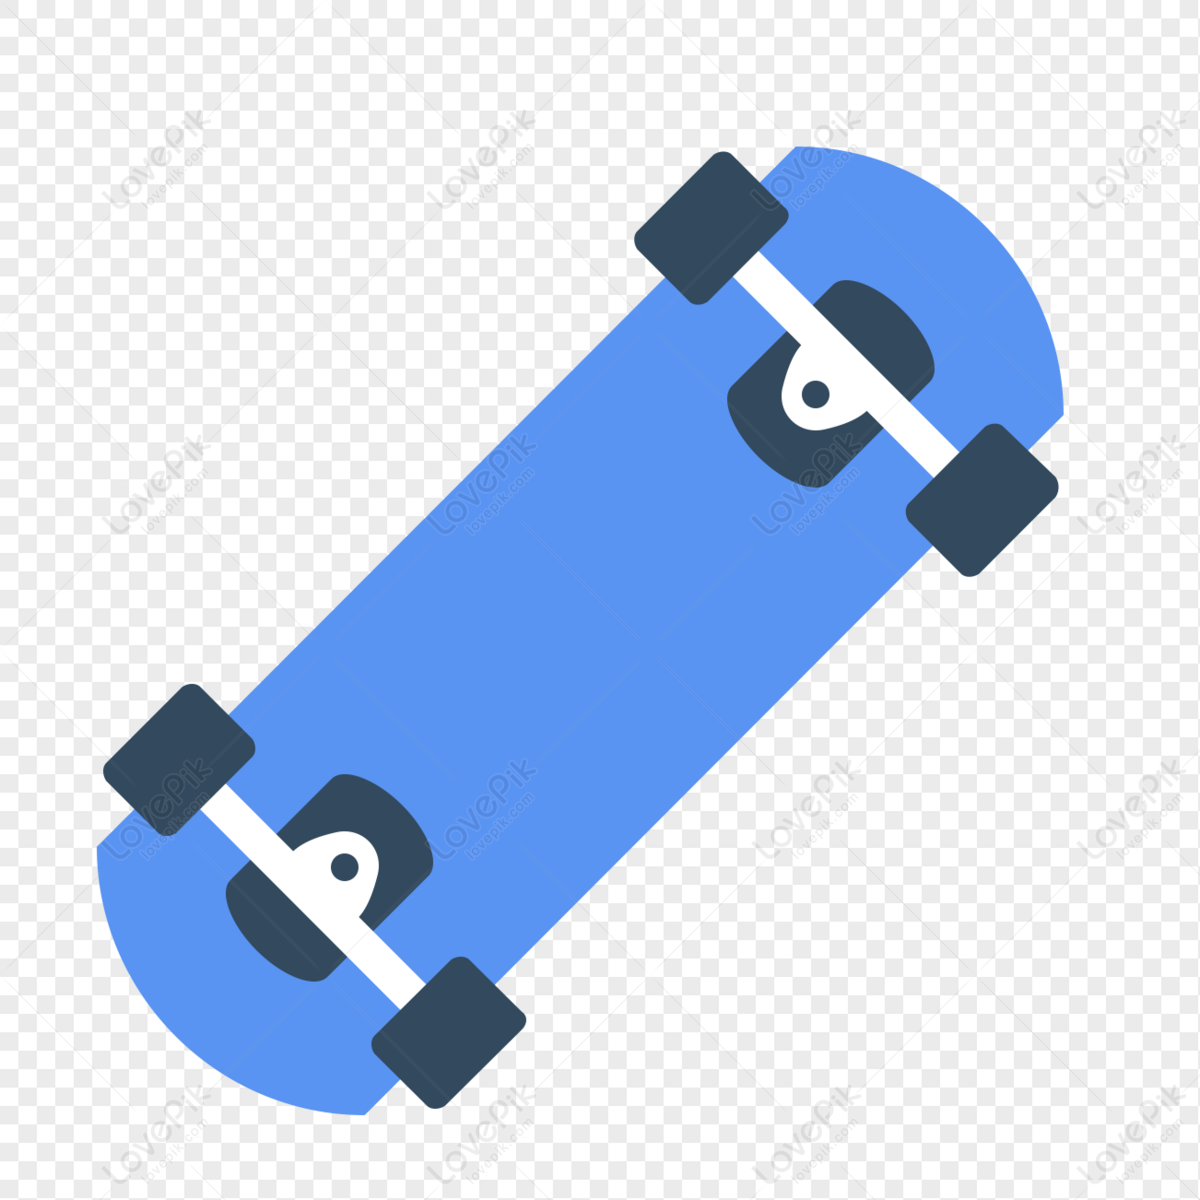 Skateboard Icon Free Vector Illustration Material Image Free Download Clipart Image For Free Download - Lovepik | 401274371